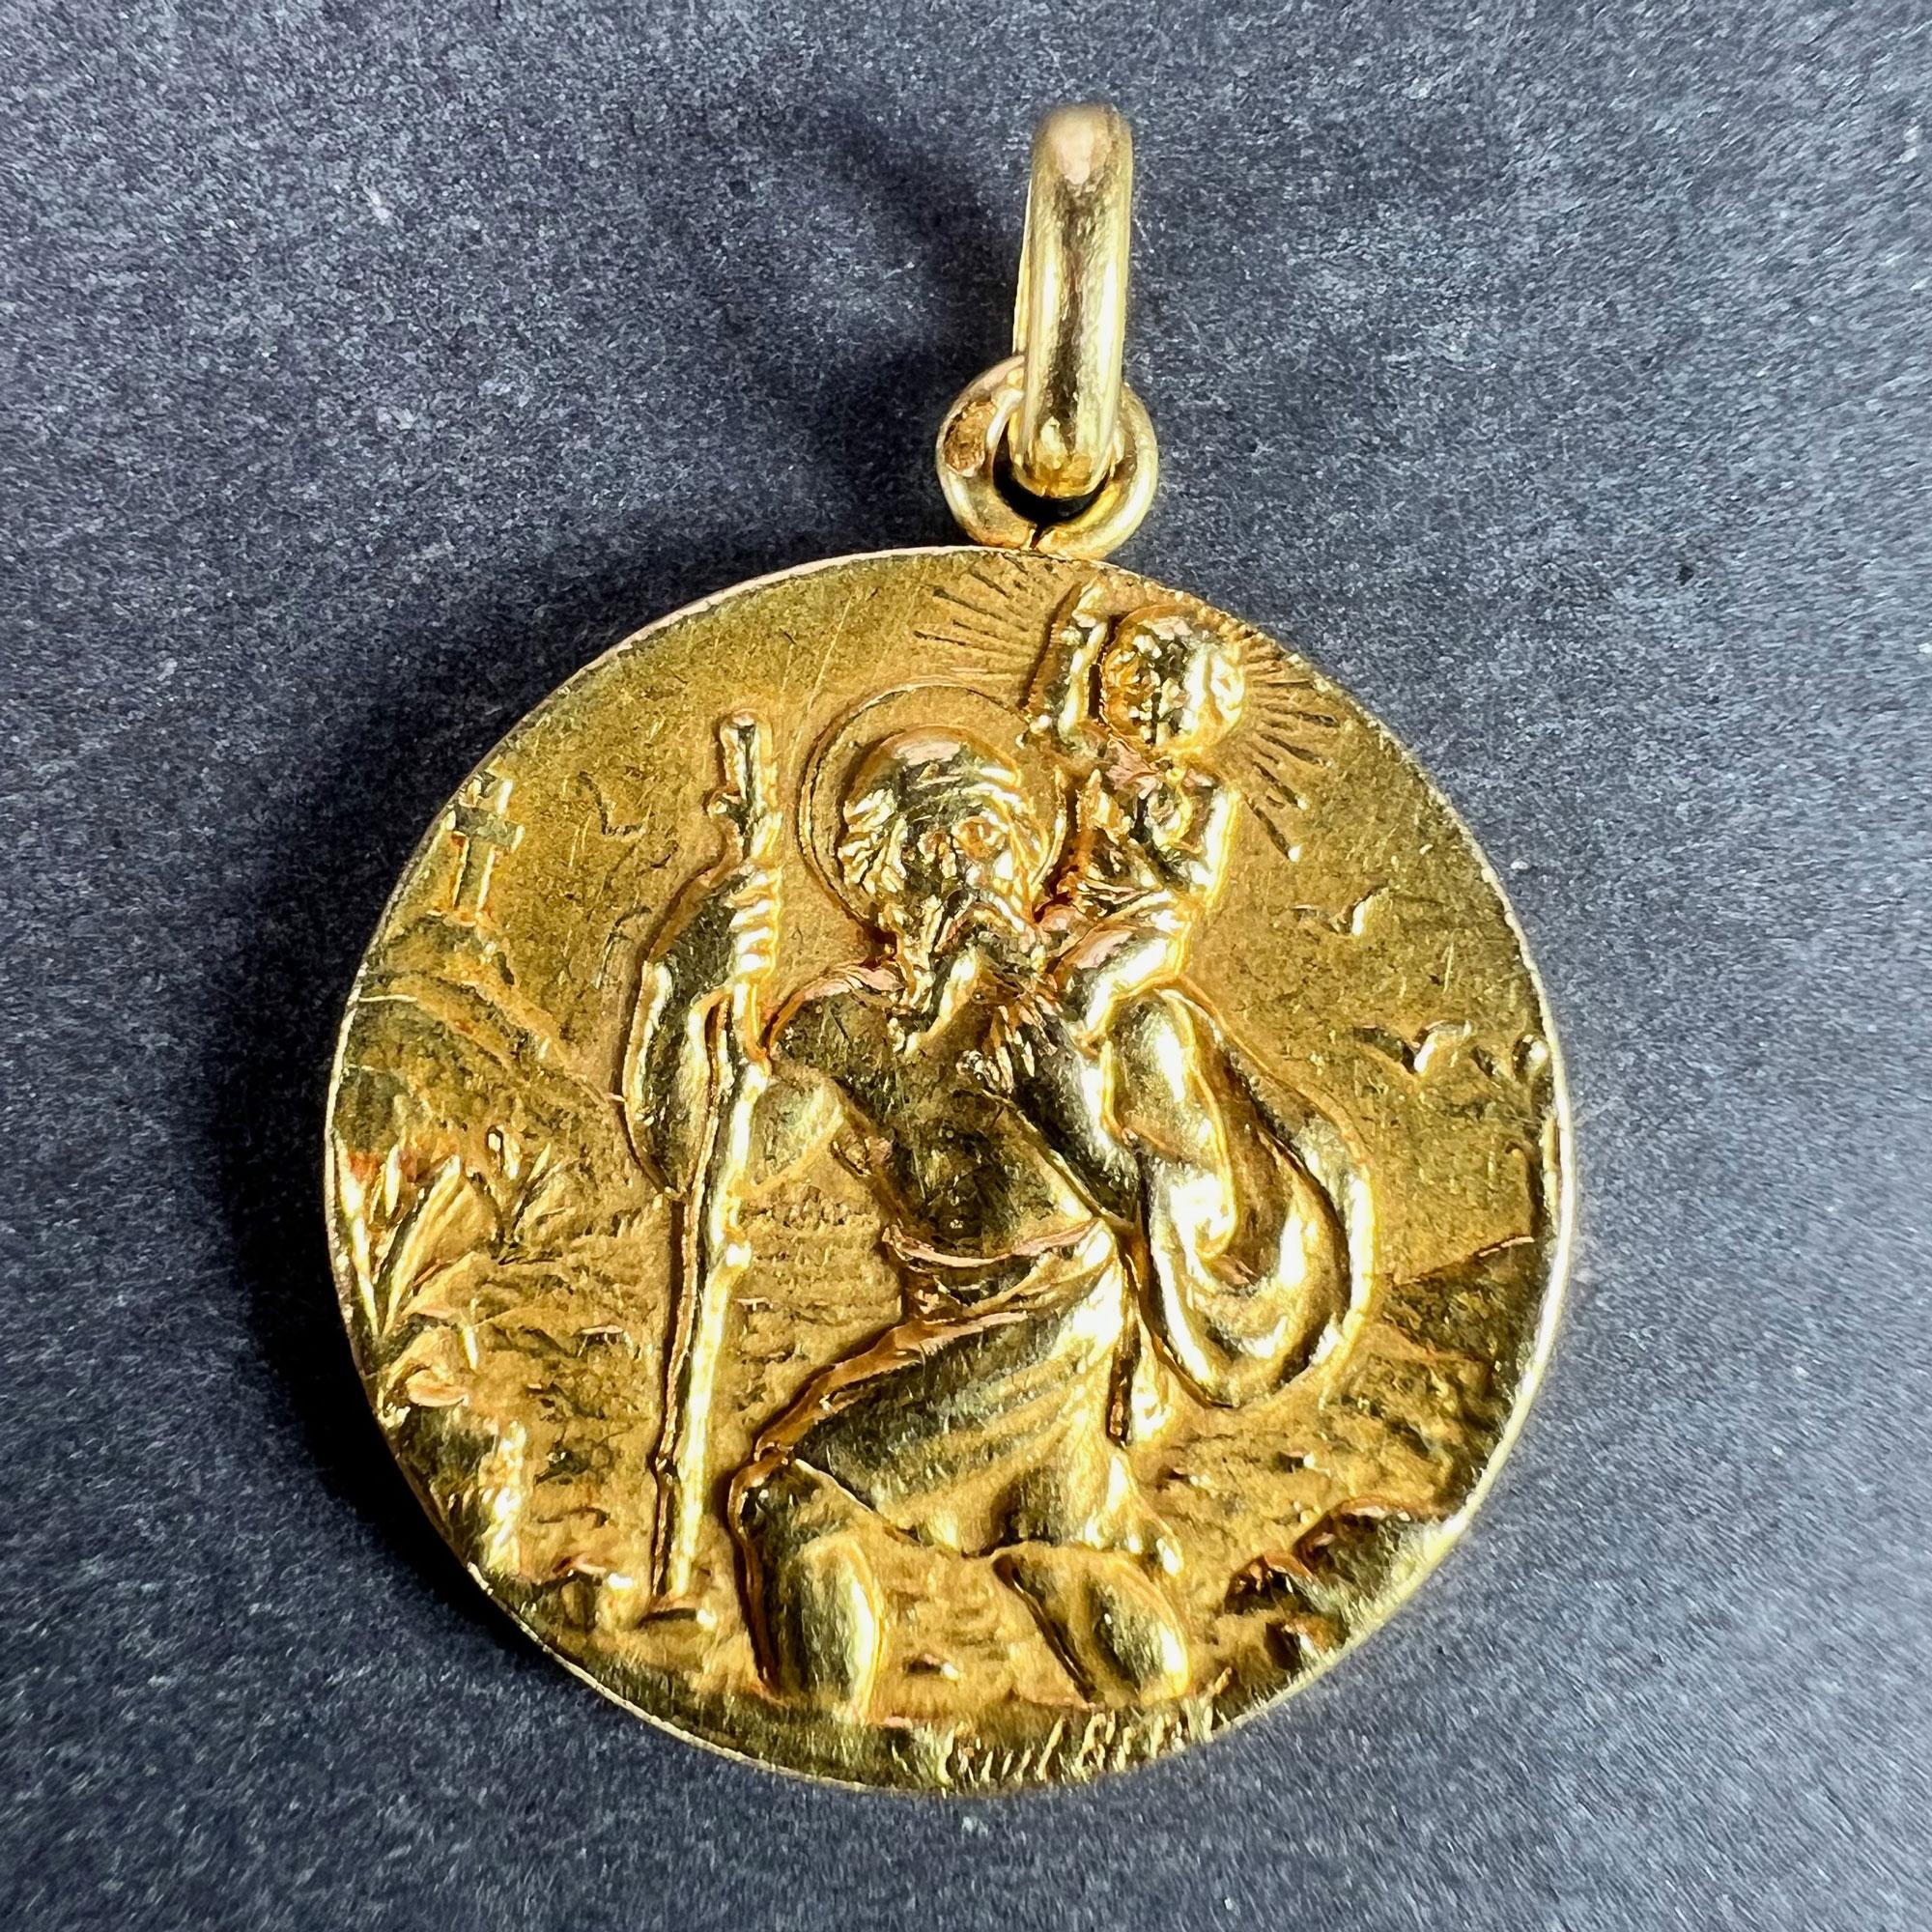 A French 18 karat (18K) yellow gold charm pendant designed as a medal depicting Saint Christopher as he carries the infant Christ across a river, the reverse with the phrase 'Regarde S Christophe Puis Va T'en Rassure' (Look at St Christopher and go